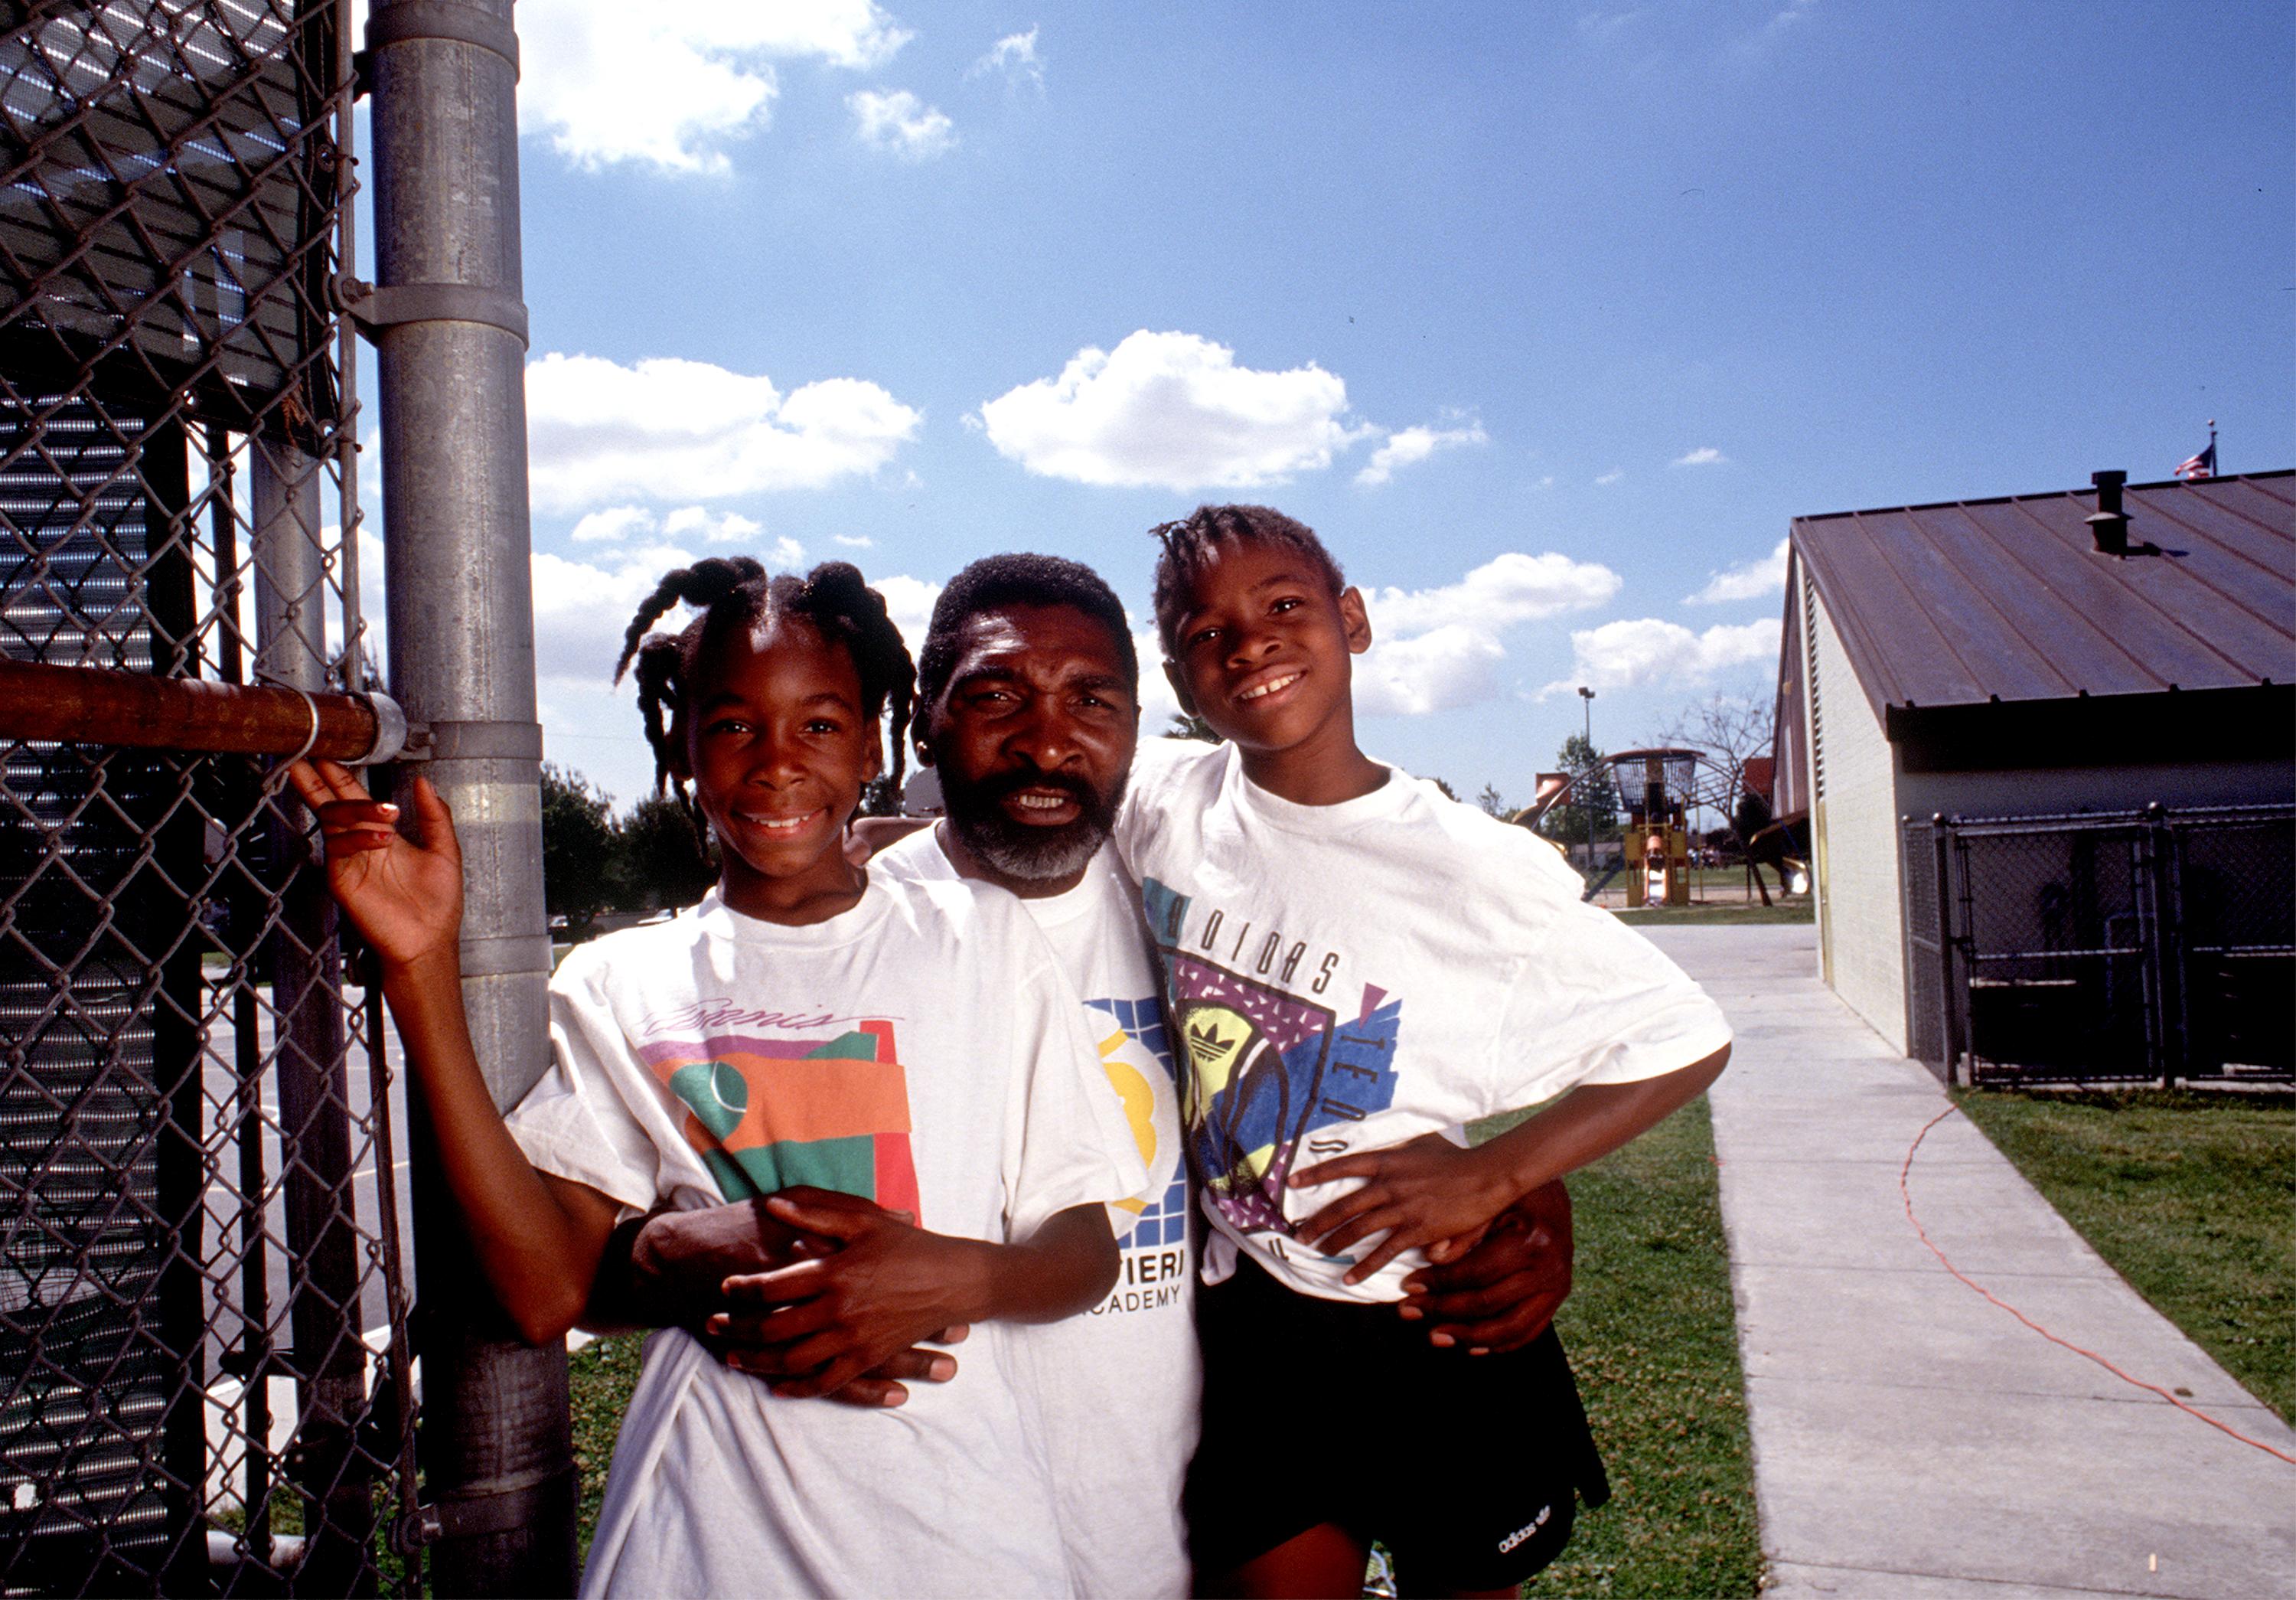 Richard Williams, center, with his daughters Venus, left, and Serena 1991 in Compton, CA. | Source: Getty Images 